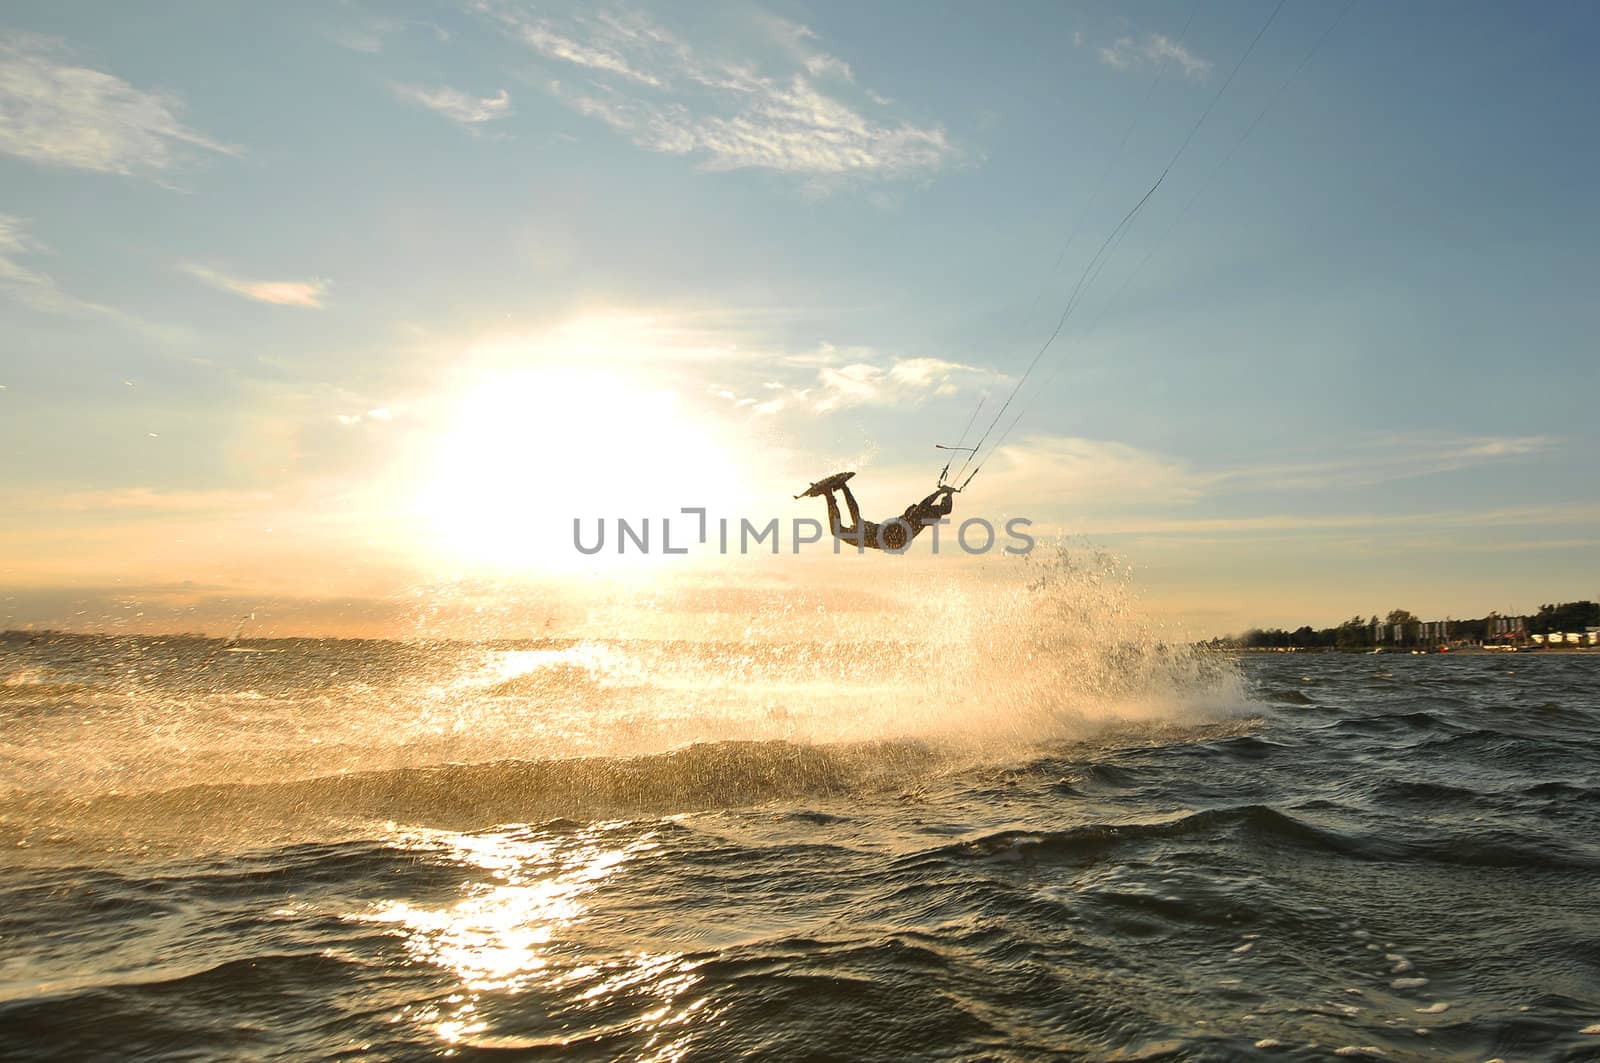 Portrait of a kiteboarder before sunset